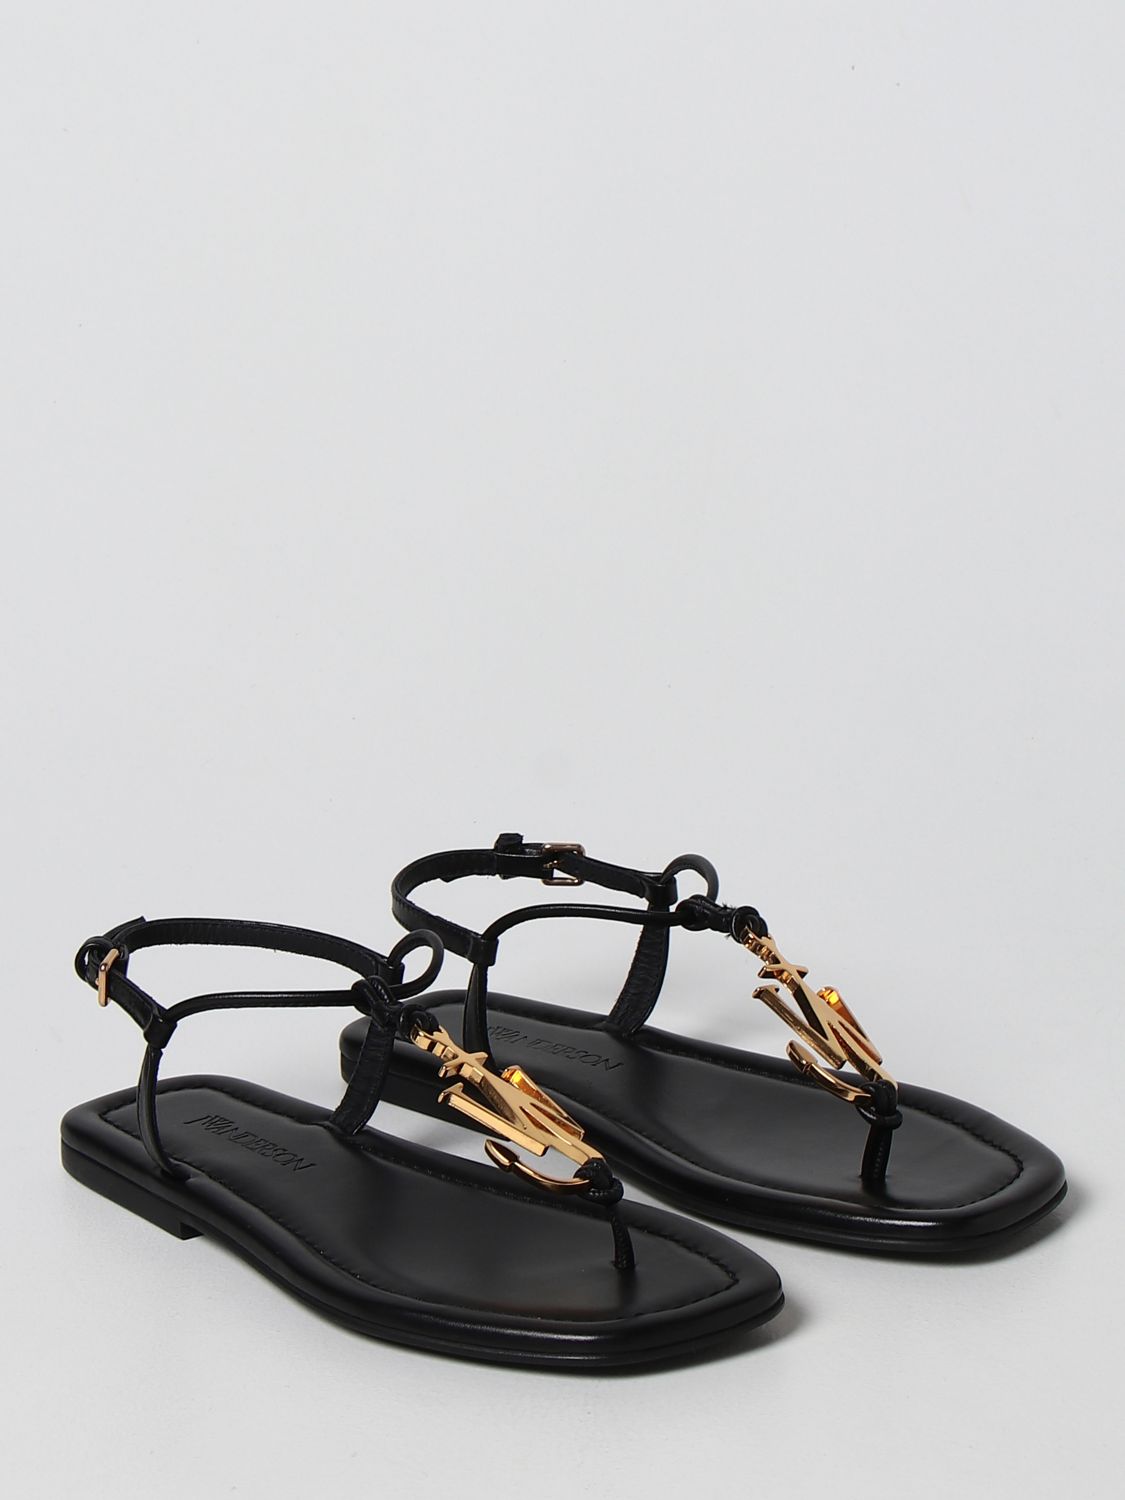 Jw Anderson Outlet: thong sandal in leather - Black | Jw Anderson flat ...